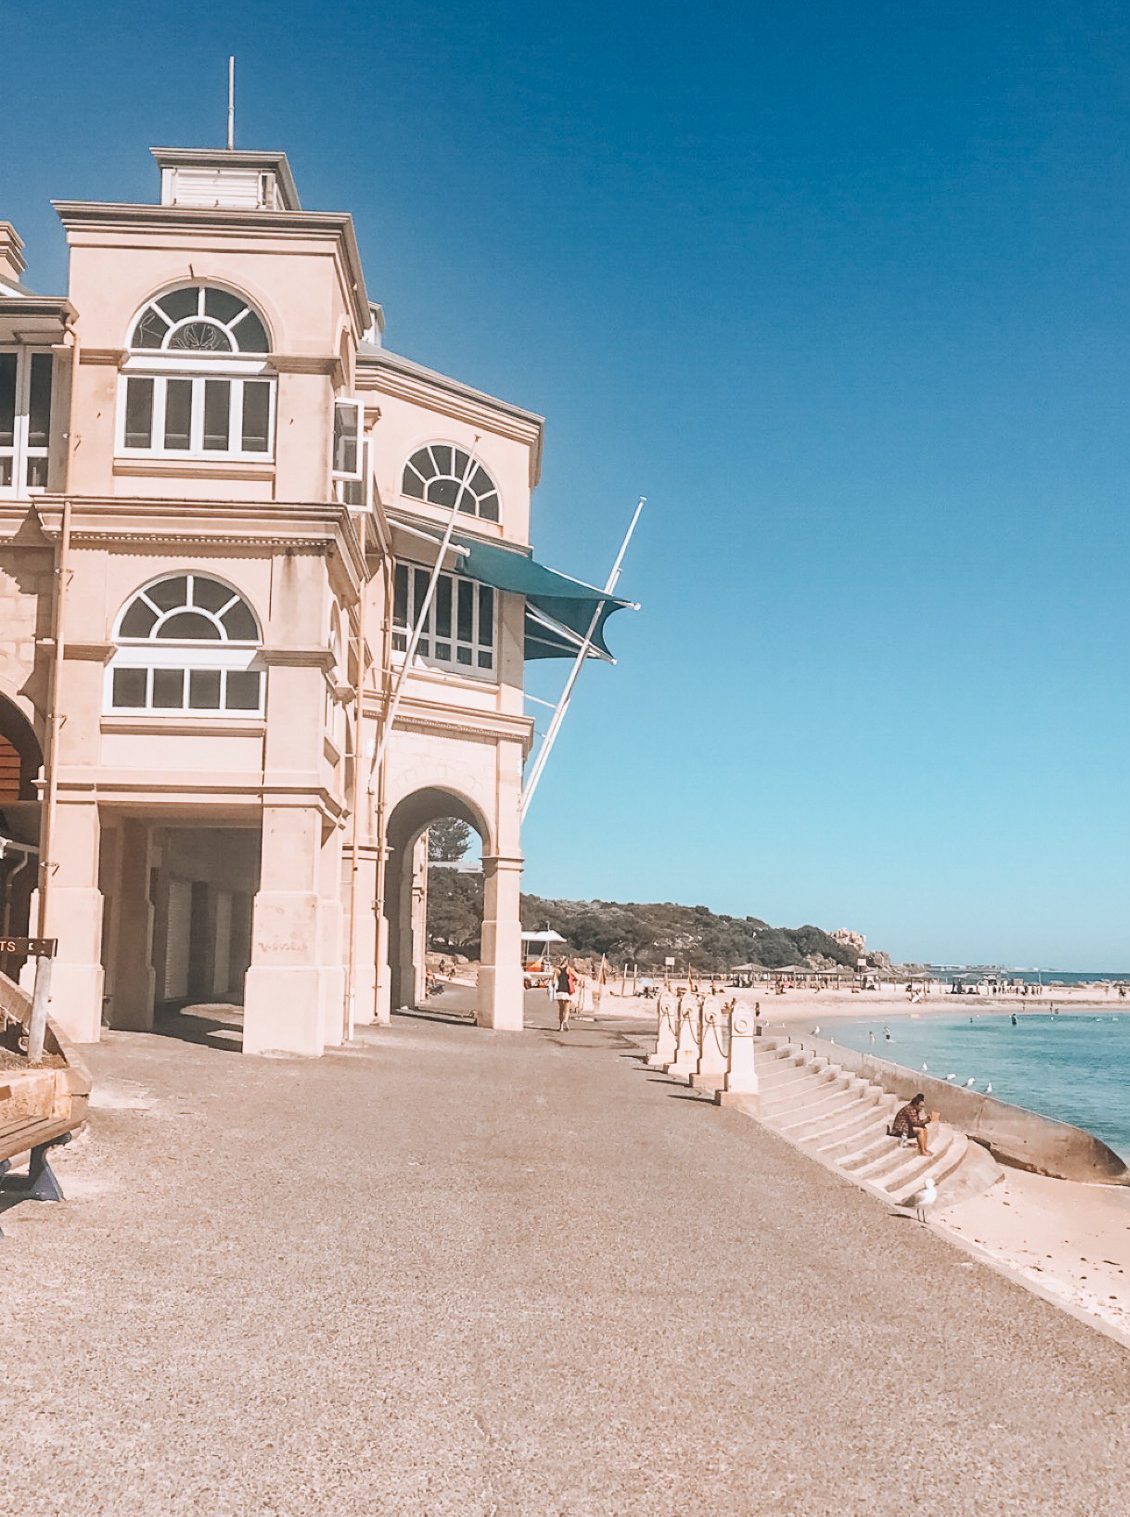 Cottesloe beach surf life-saving club building Perth western Australia | Top things to see in perth